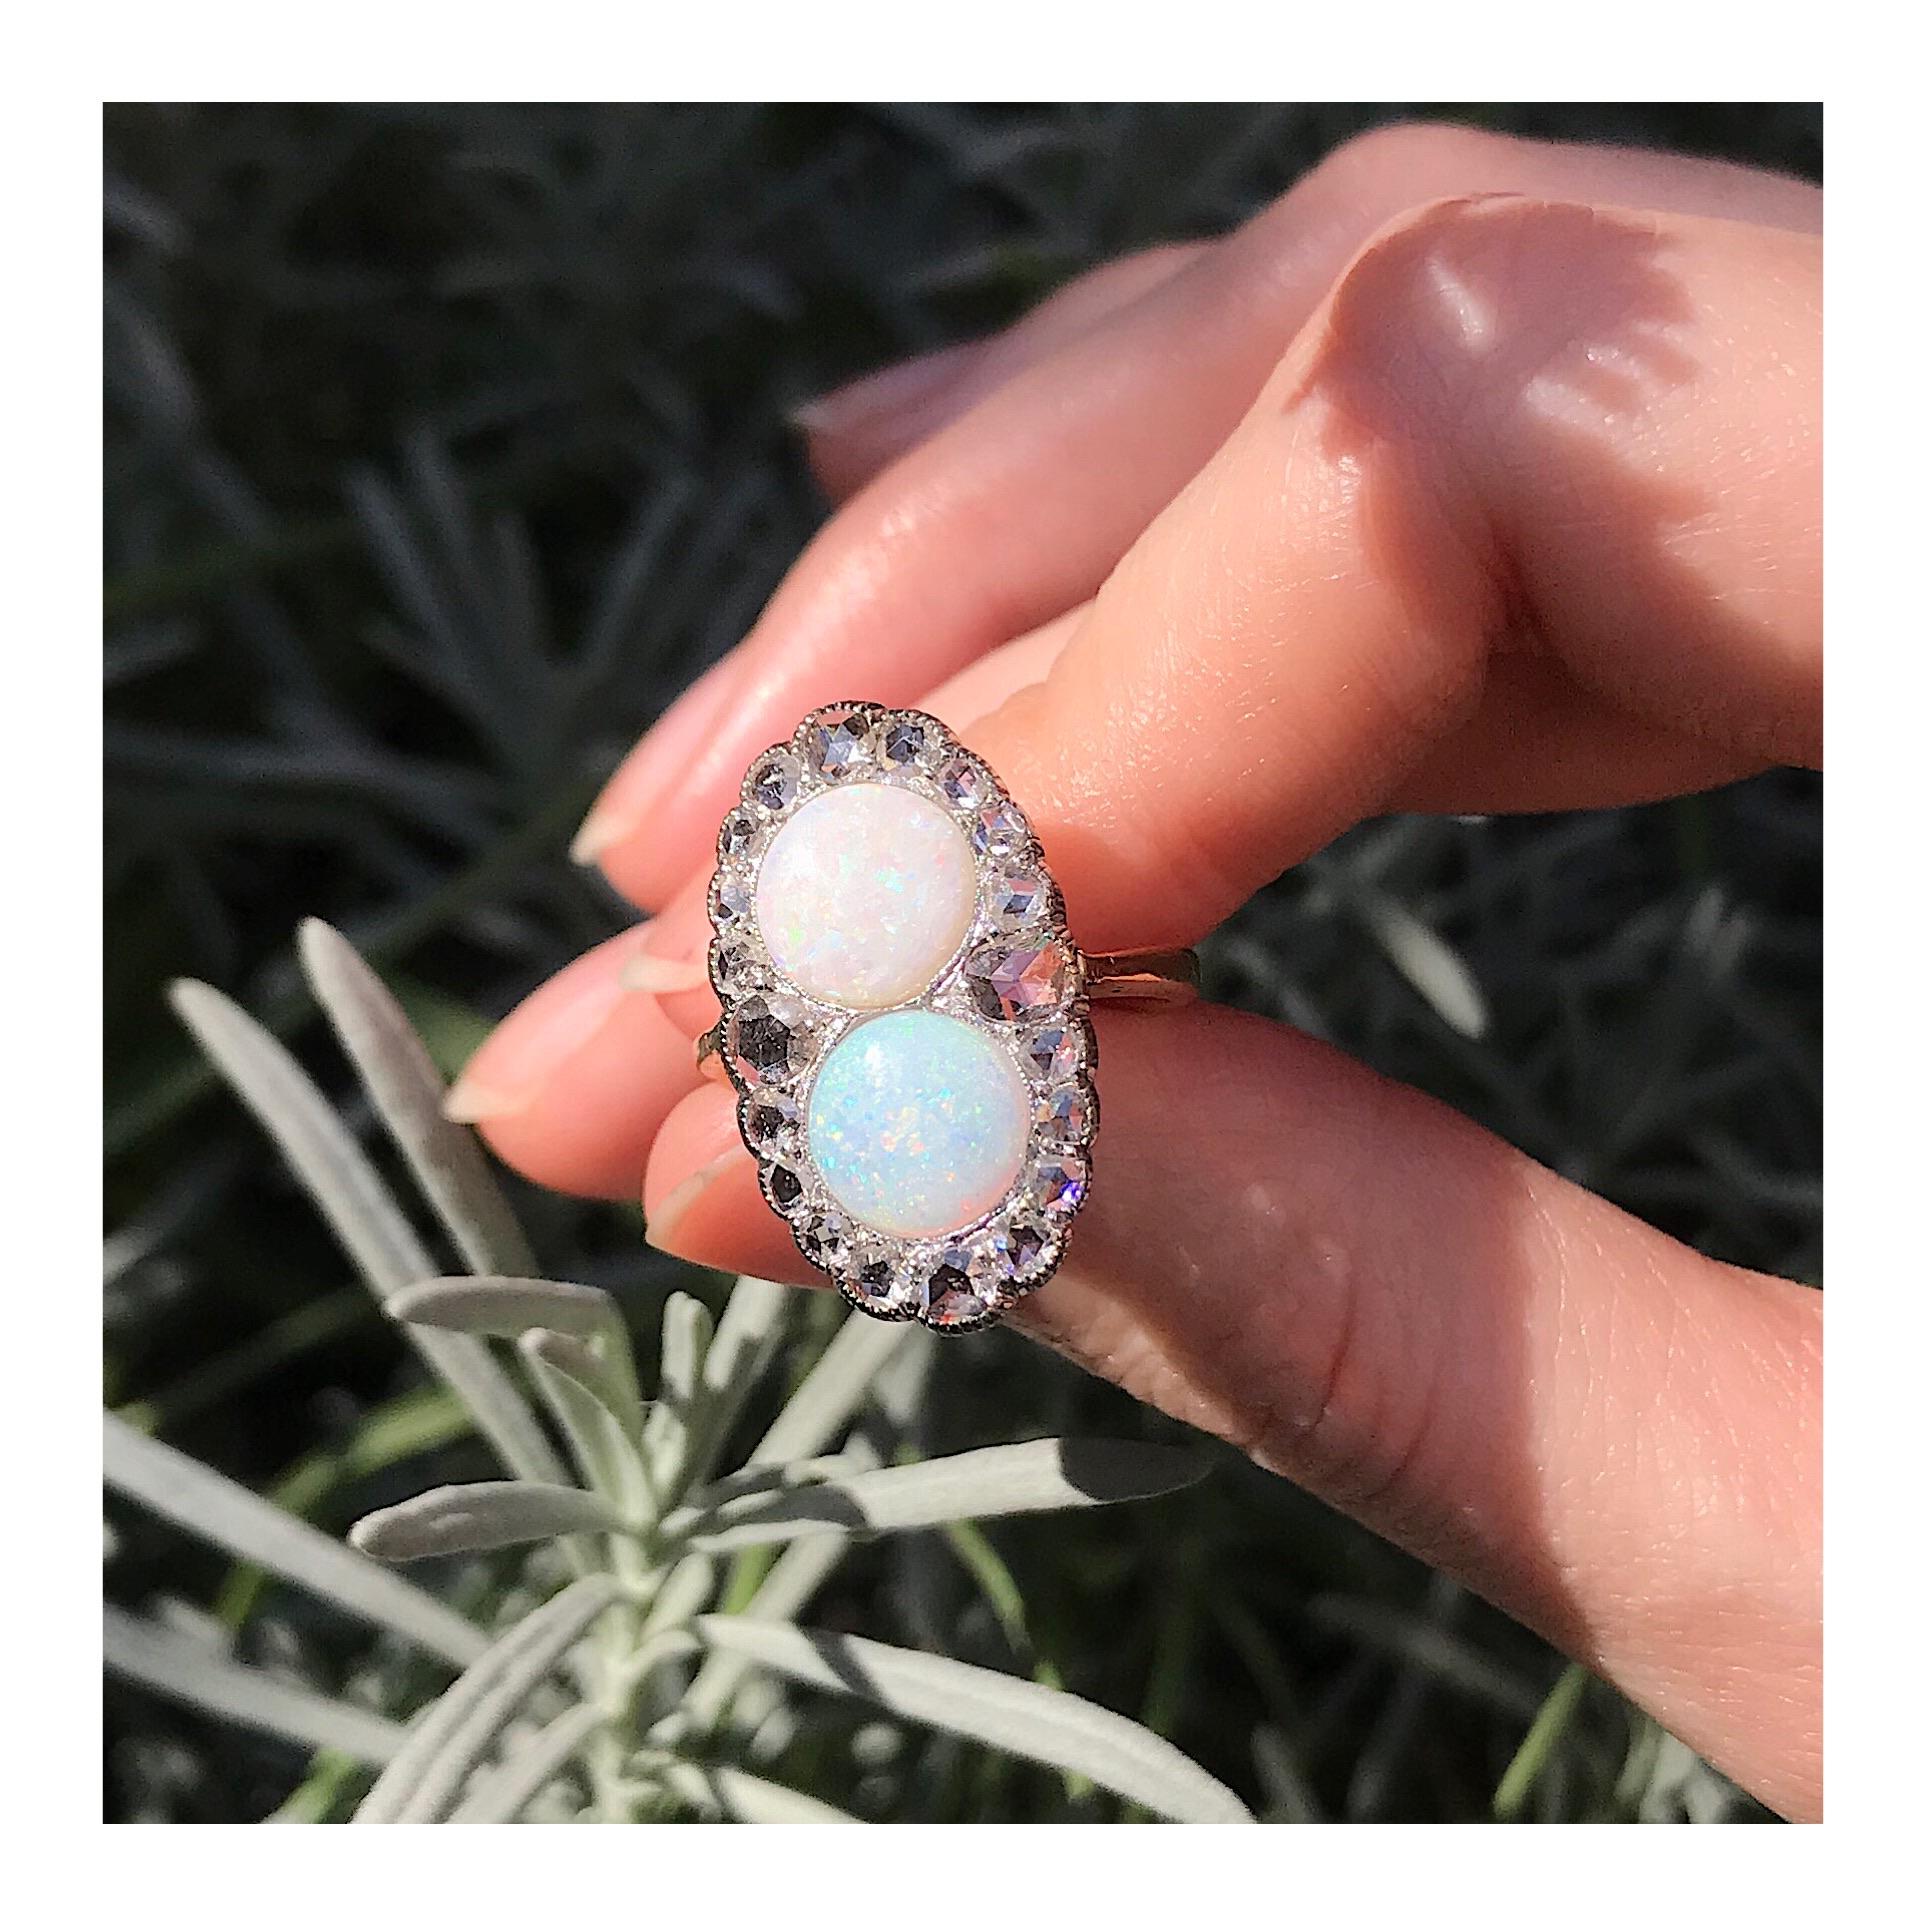 In this Victorian cluster ring from 1890, the two central cabochon cut opals seem to just keep on duplicating. With the glistening of 20 surrounding rose cut diamonds set in platinum, this whimsical jewel from 1890 could be your personal wishing